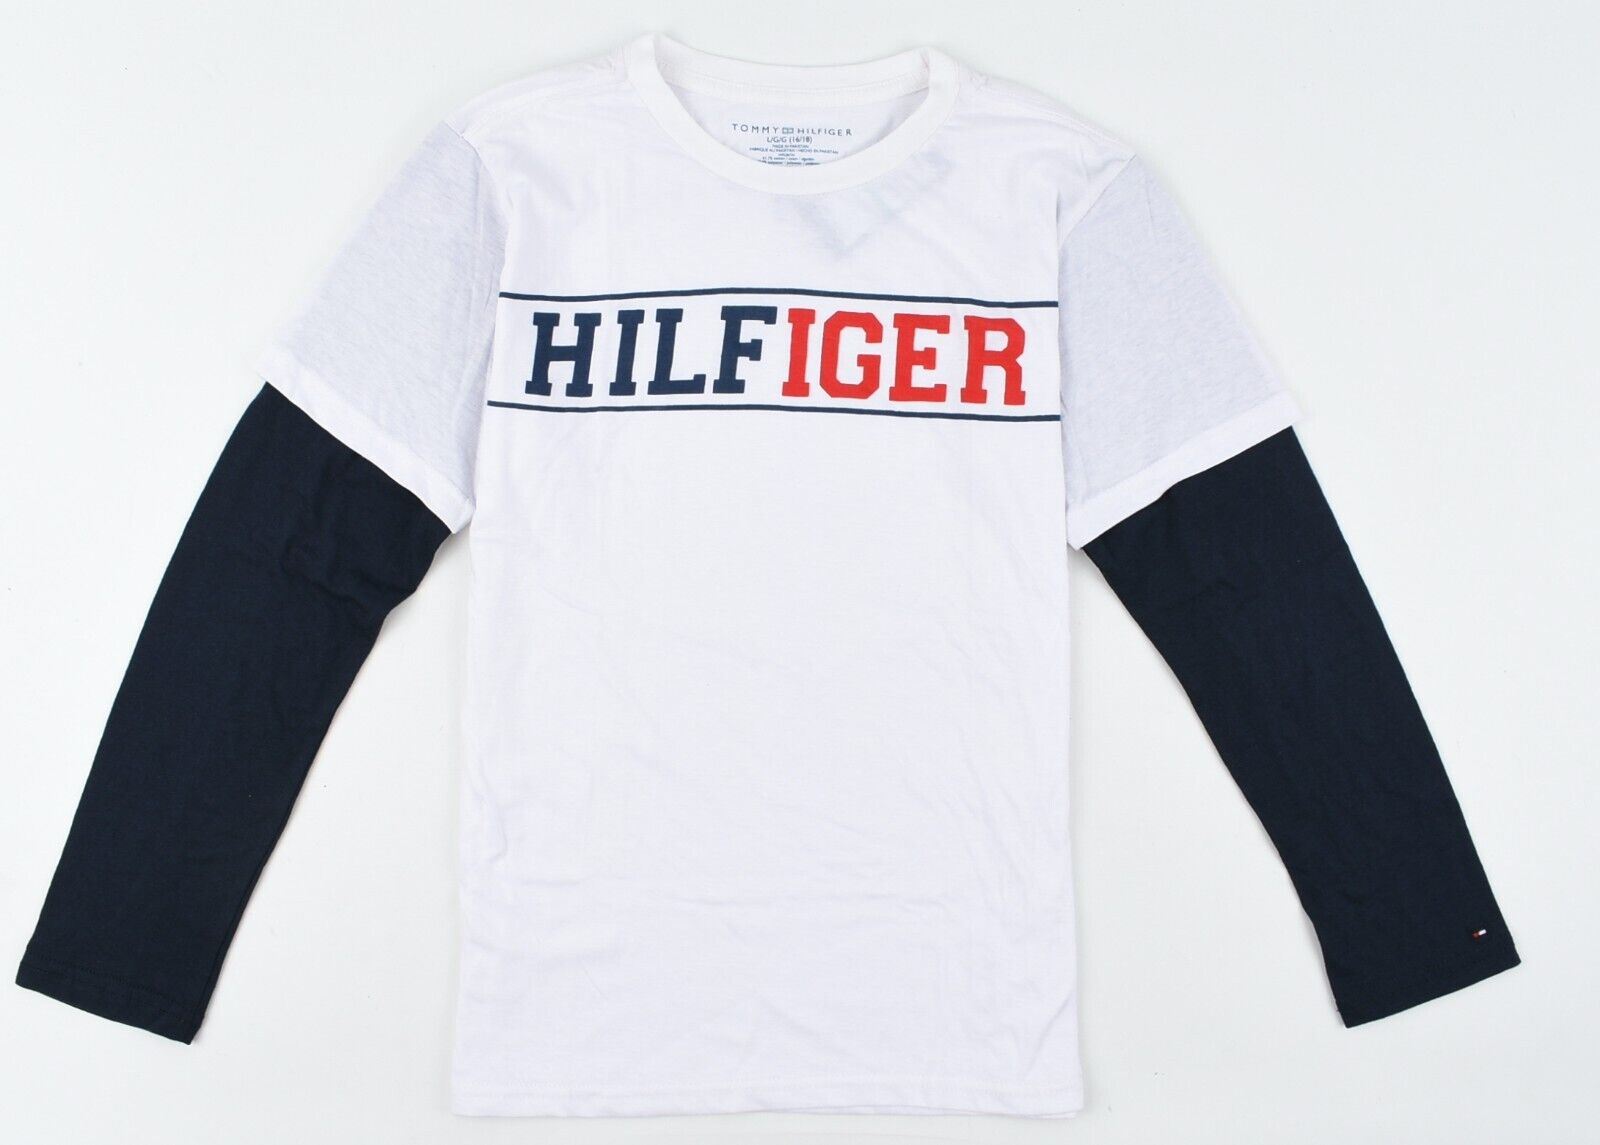 TOMMY HILFIGER Boys Kids Long Sleeve Top, White/Navy Blue, size 16-18 years